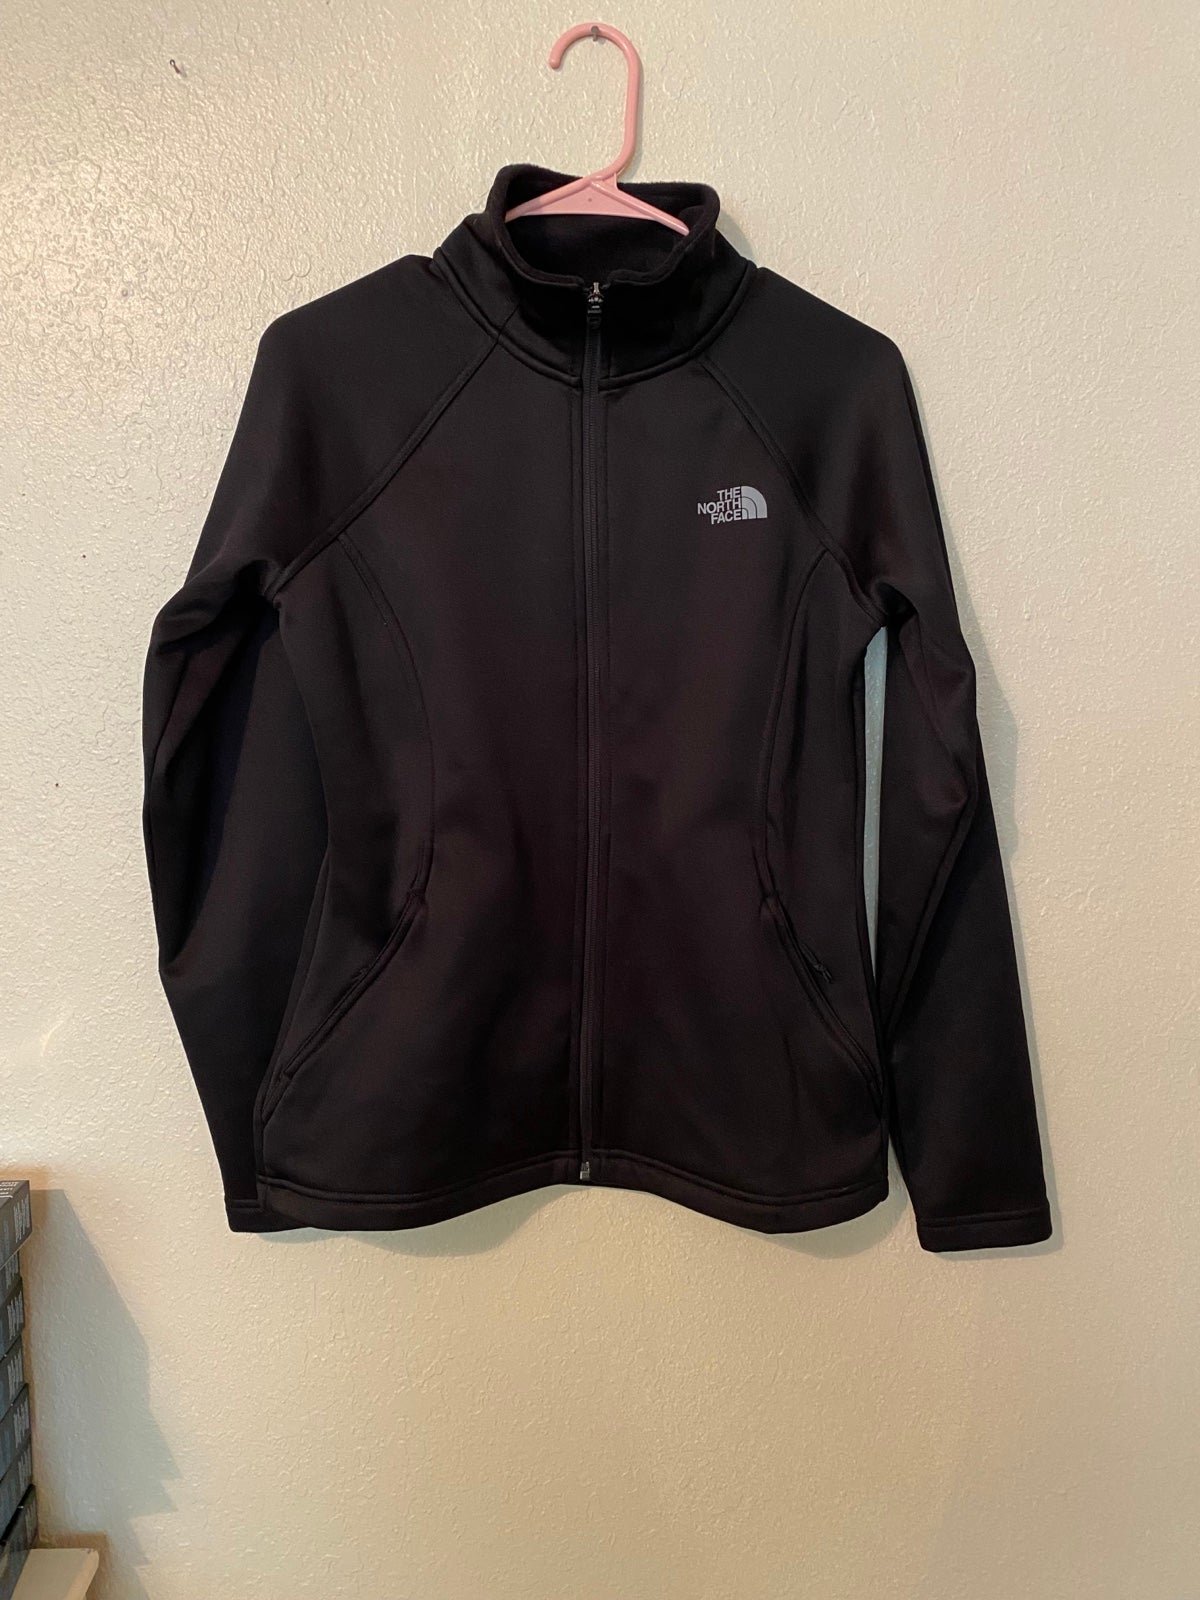 high discount The North Face Jacket full zip HbuDsuKIA well sale